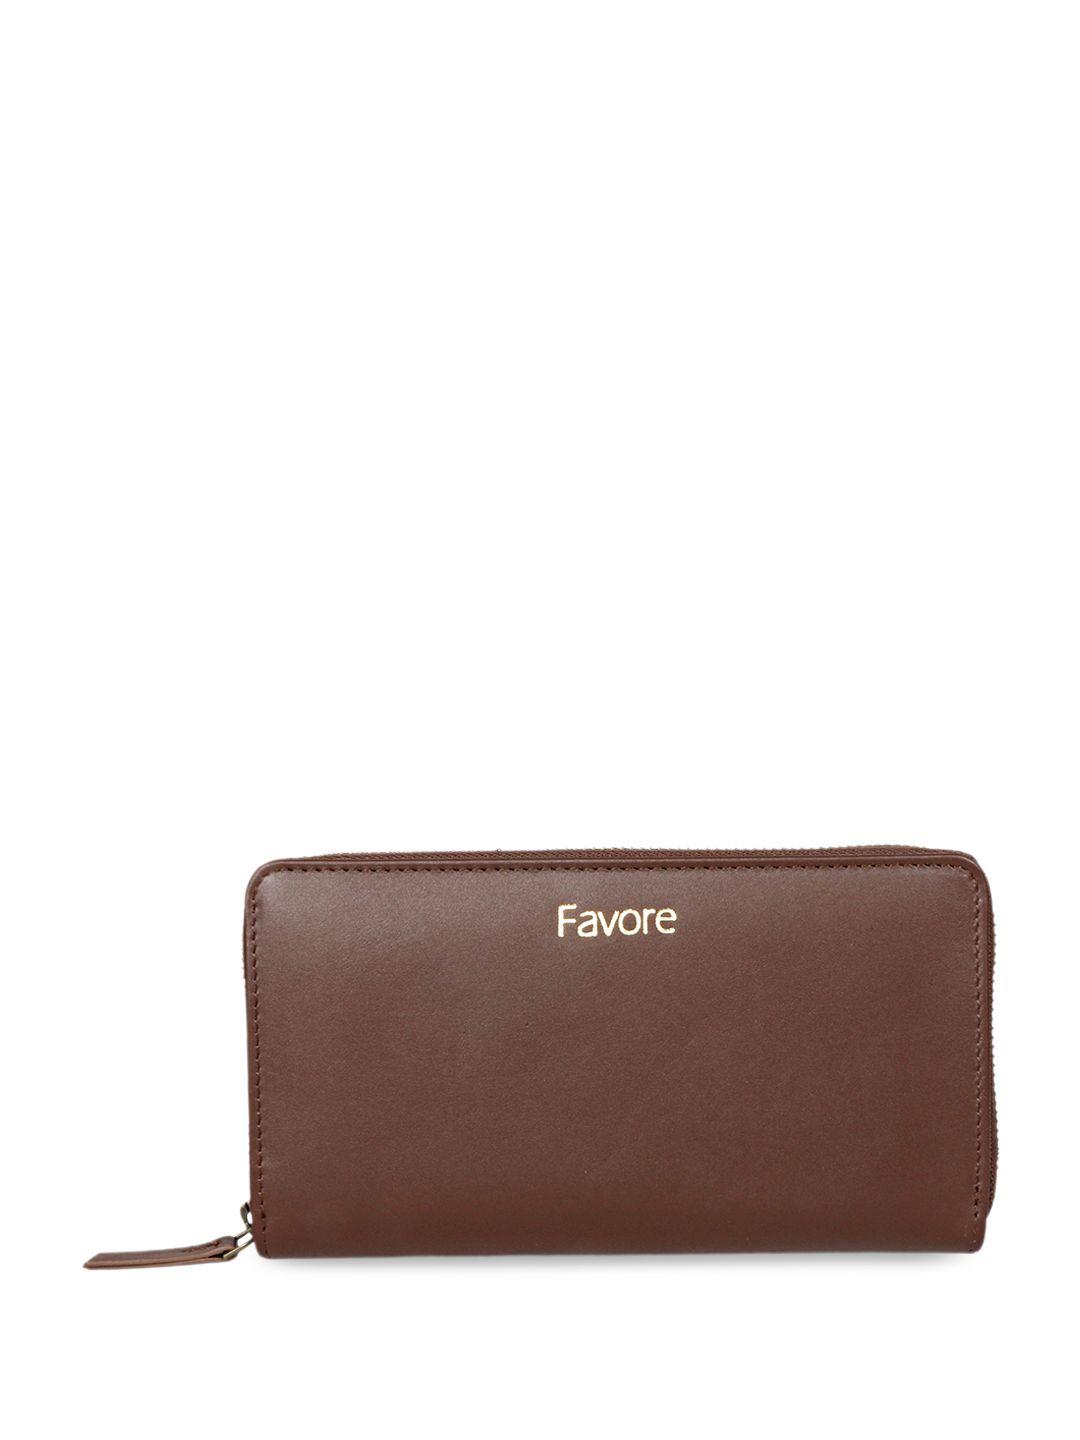 favore solid leather purse clutch